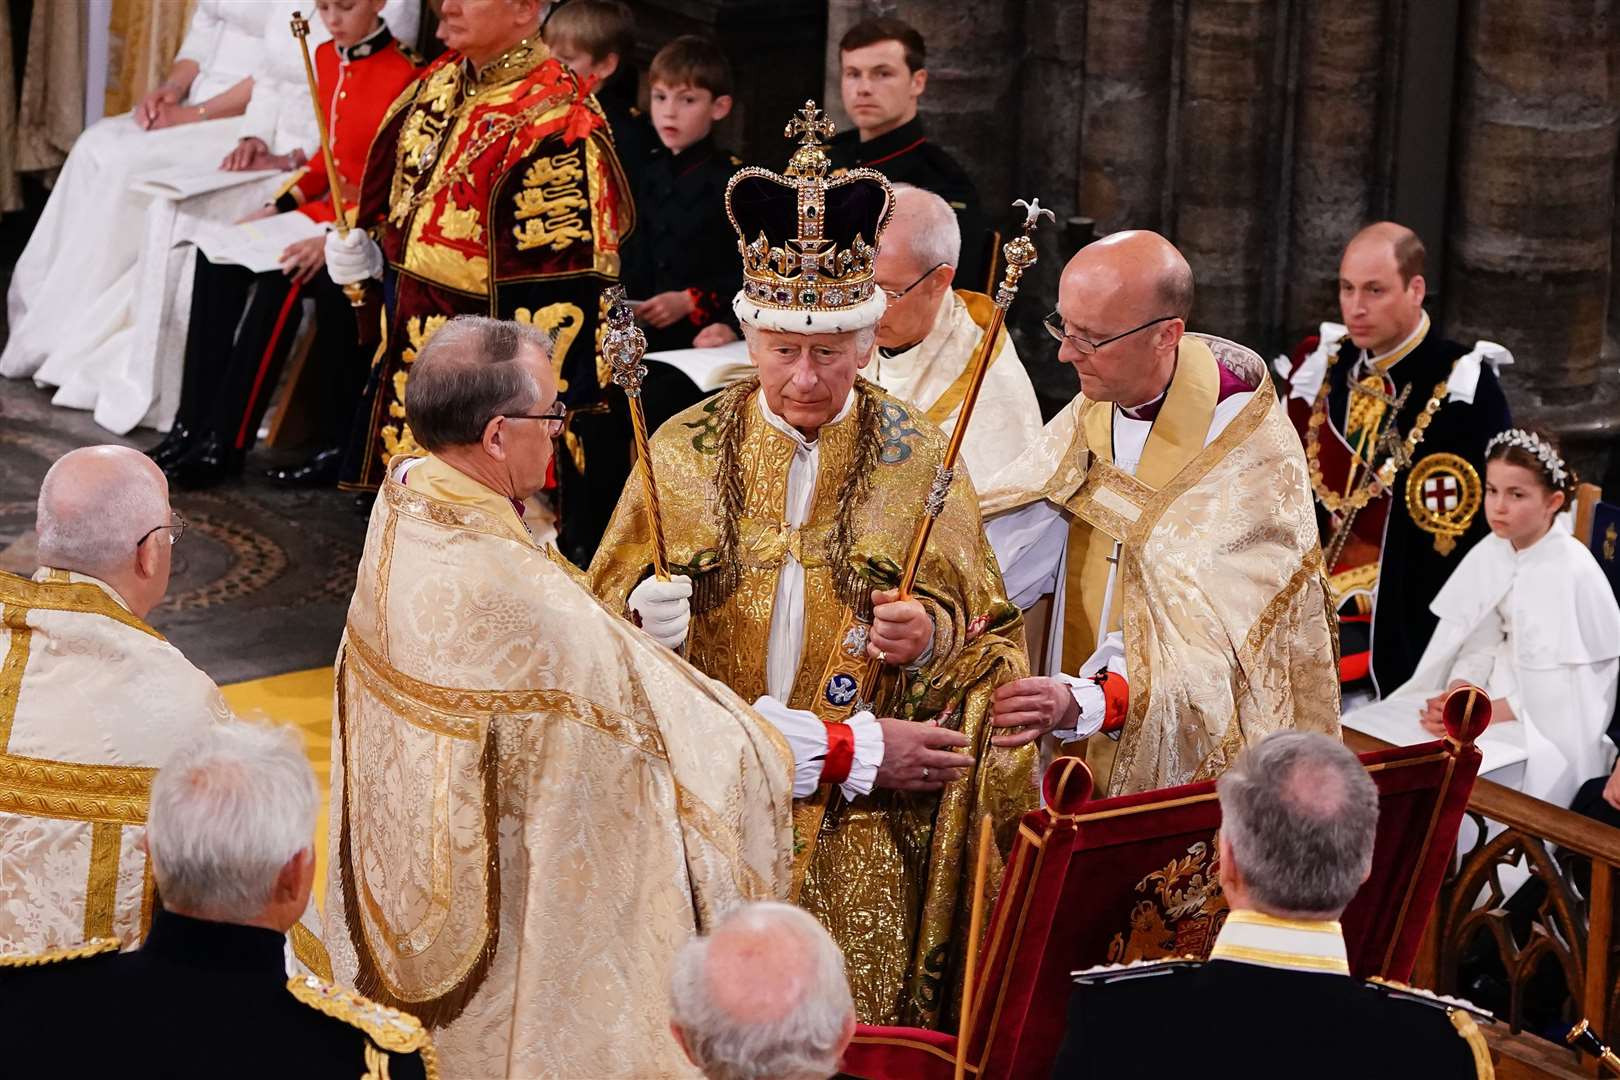 The coronation service was 'unbelievably moving' and the solemnity of the occasion was 'majestic'. Picture: PA Rota